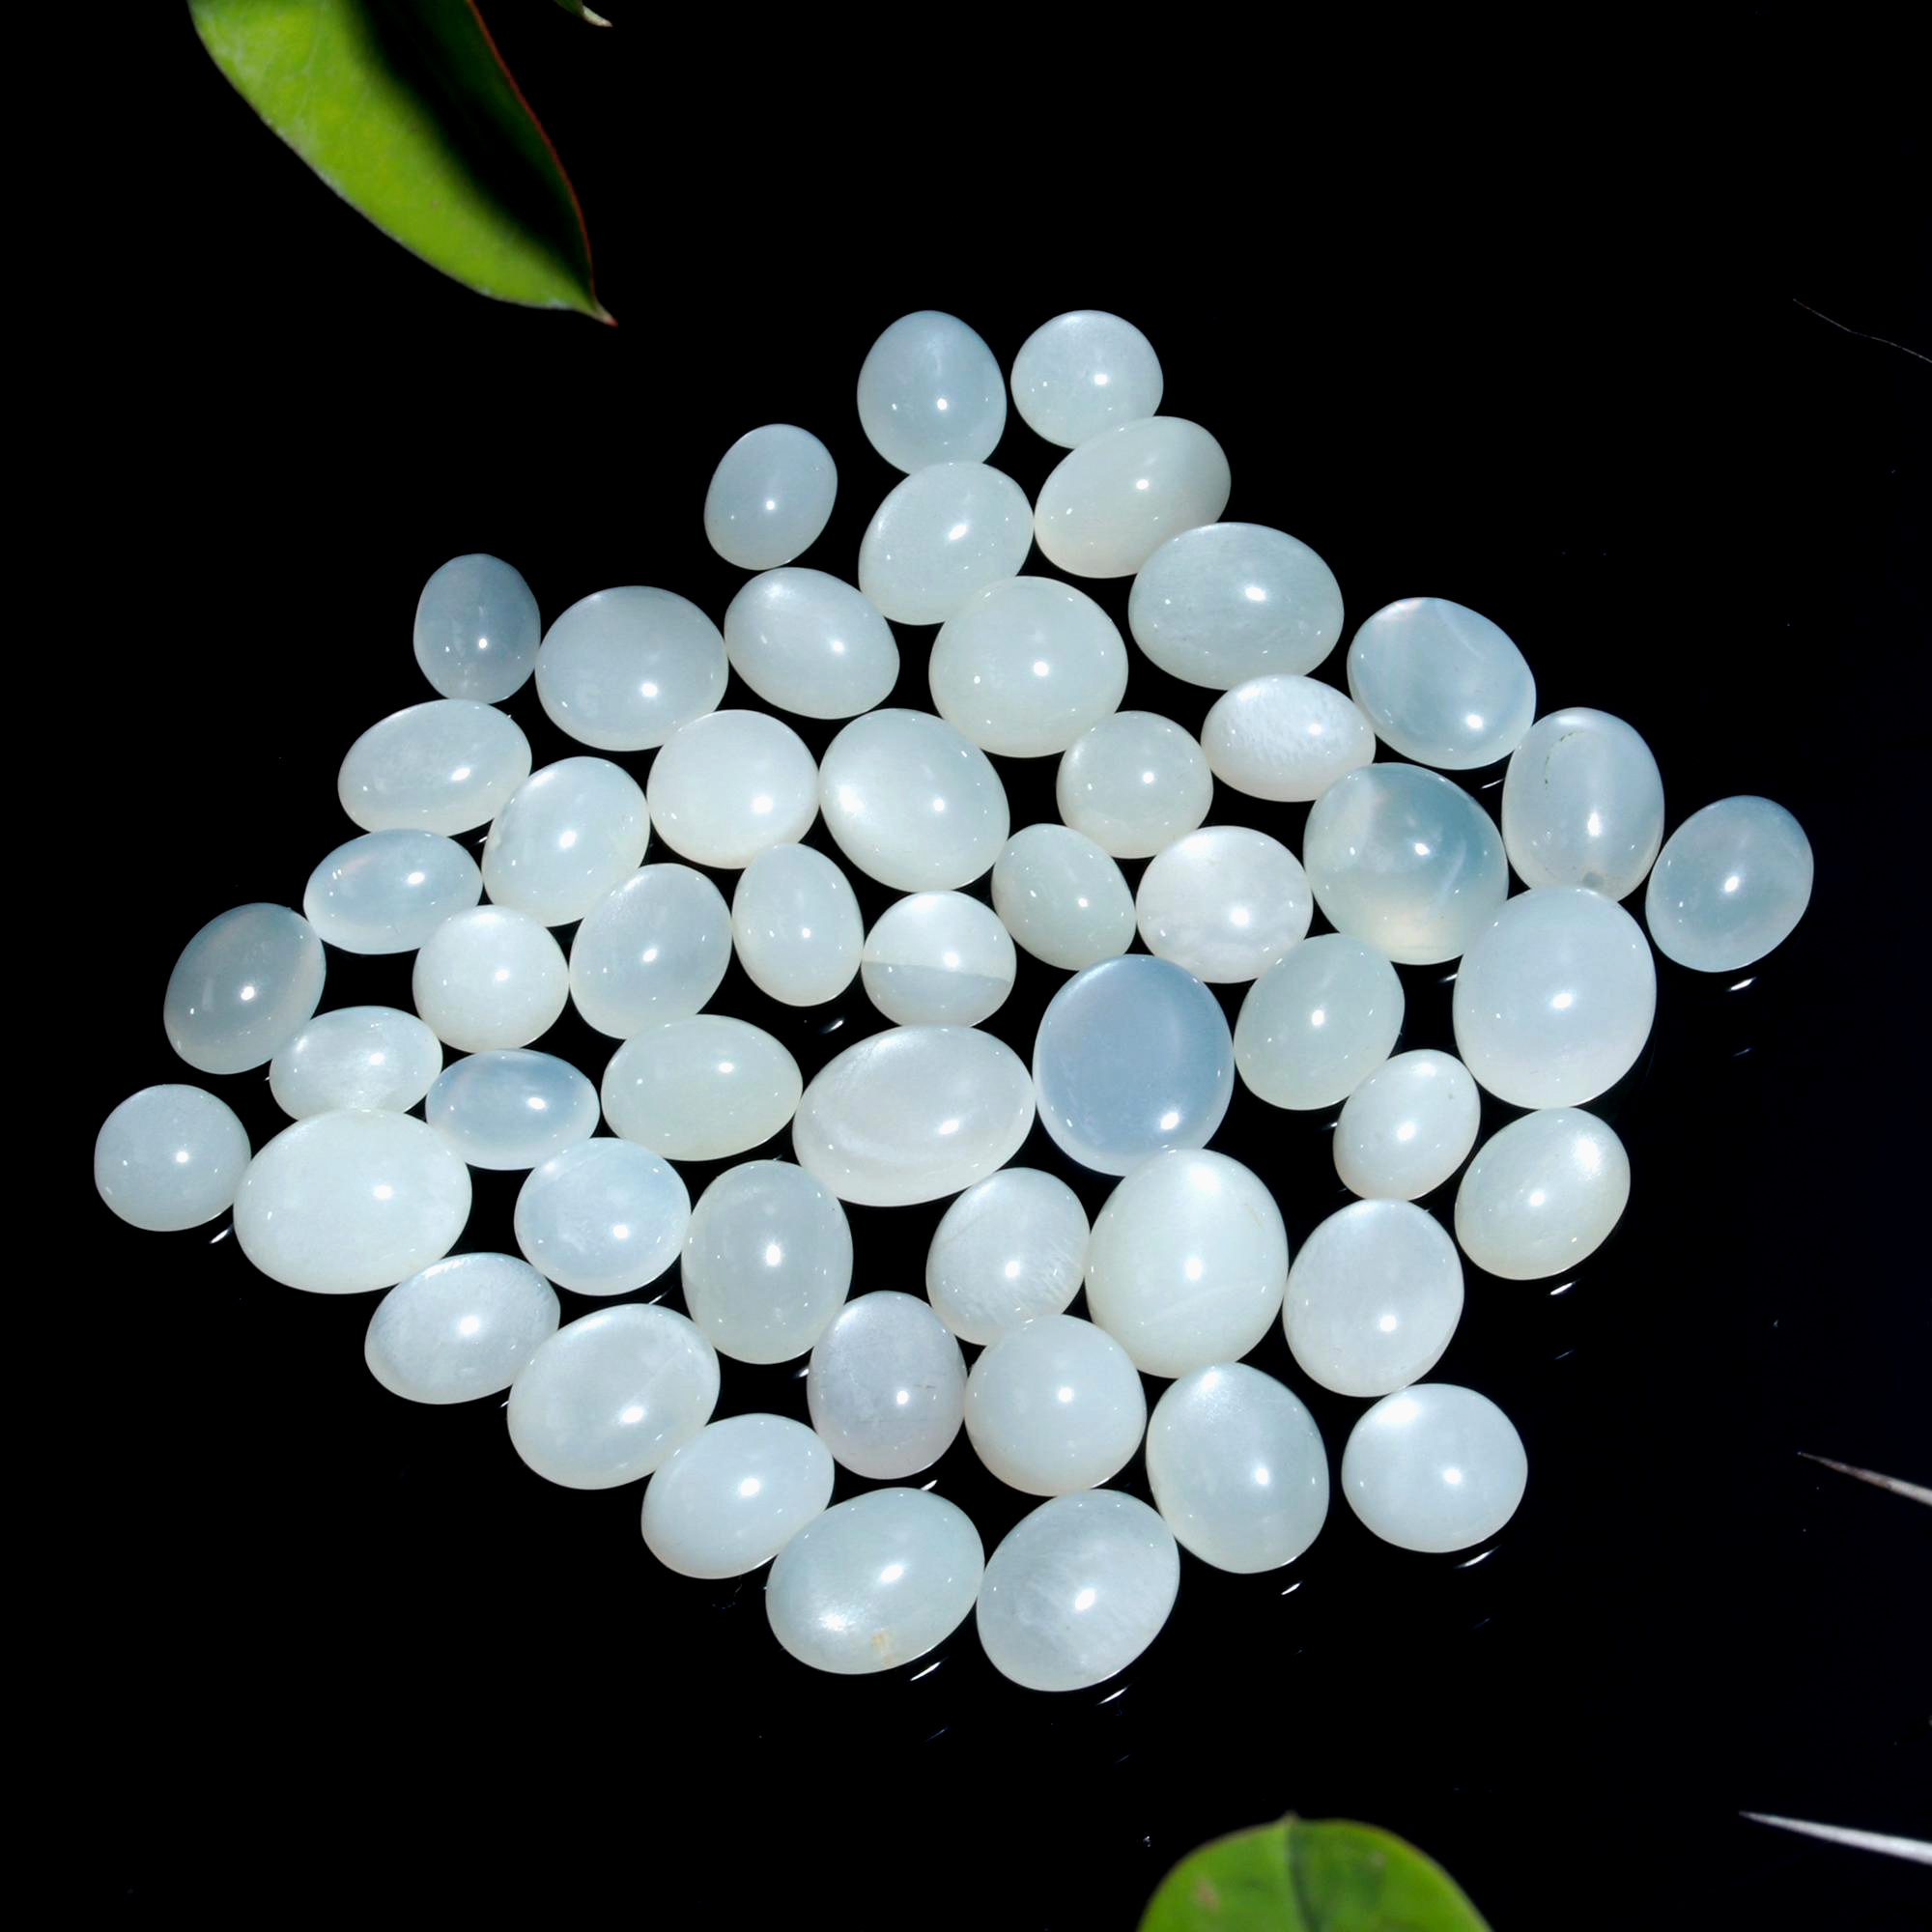 53 Pcs. 98Cts. Natural White Rainbow Moonstone polished Mix Cabochon Wholesale Loose Lot Size 10x7 6x6mm Gemstone for jewelry